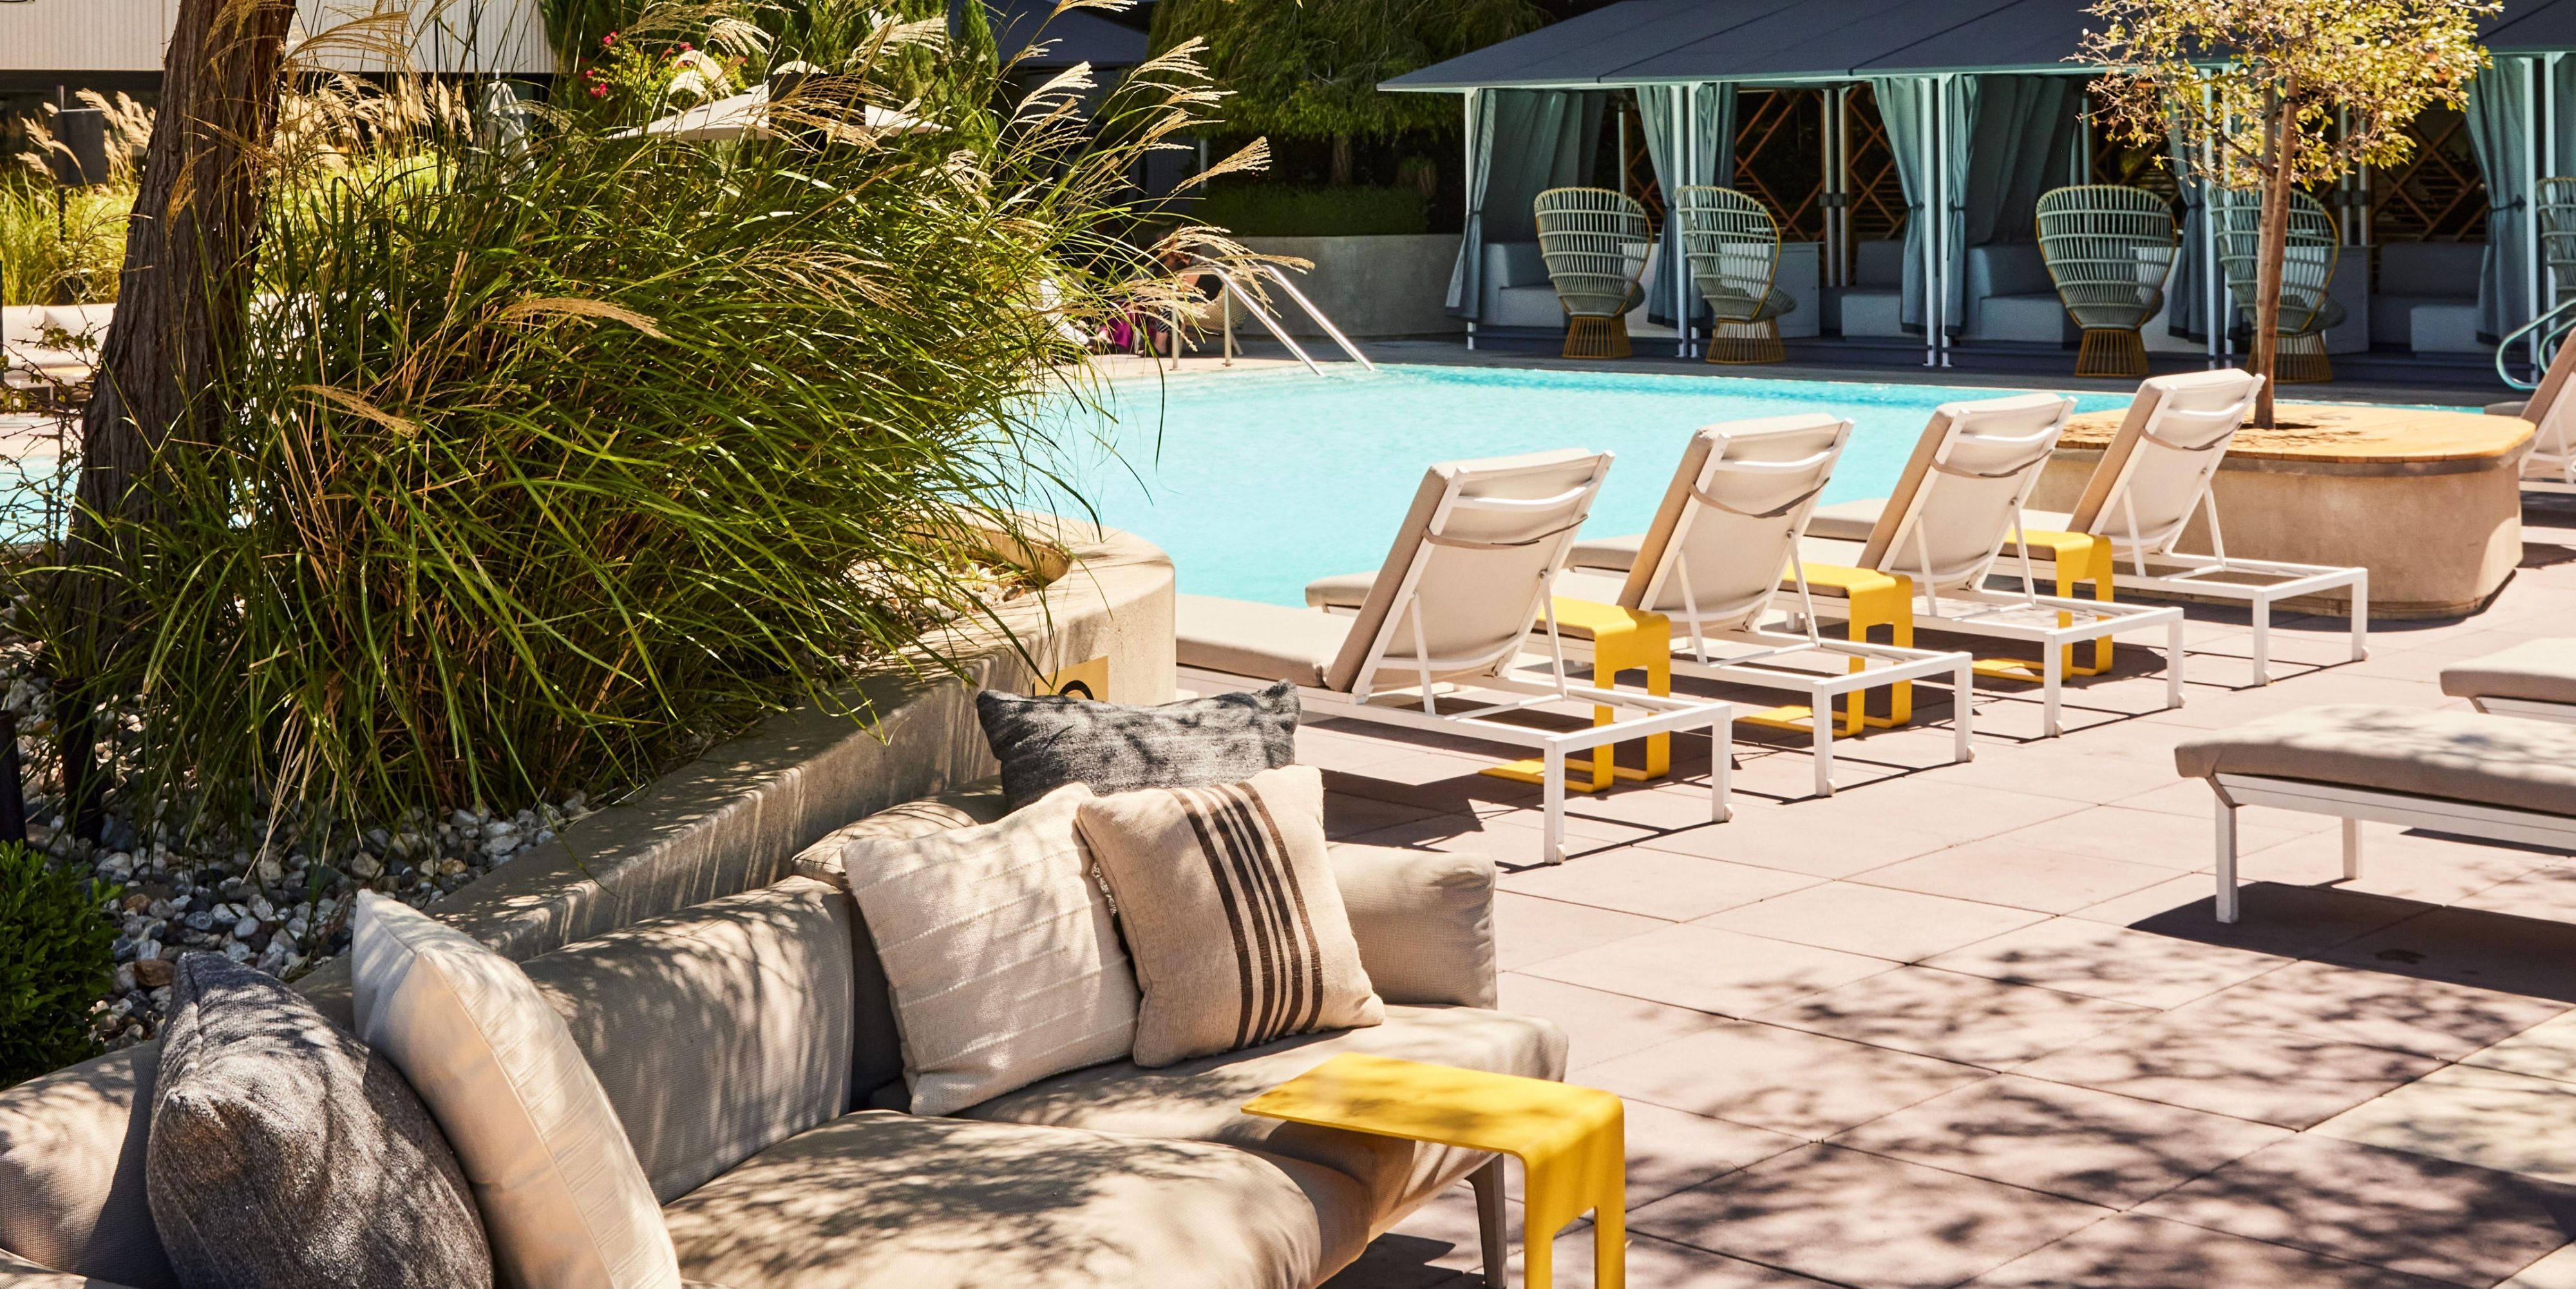 Soak up the sun and the new Sacramento social scene on our third-floor pool deck. Its prime position overlooking Downtown Commons and the Golden 1 Center makes it an ideal hangout on Kings home game nights. Claim a chaise or a VIP bungalow and enjoy farm-to-fork fare and craft cocktails from Revival at the Sawyer.